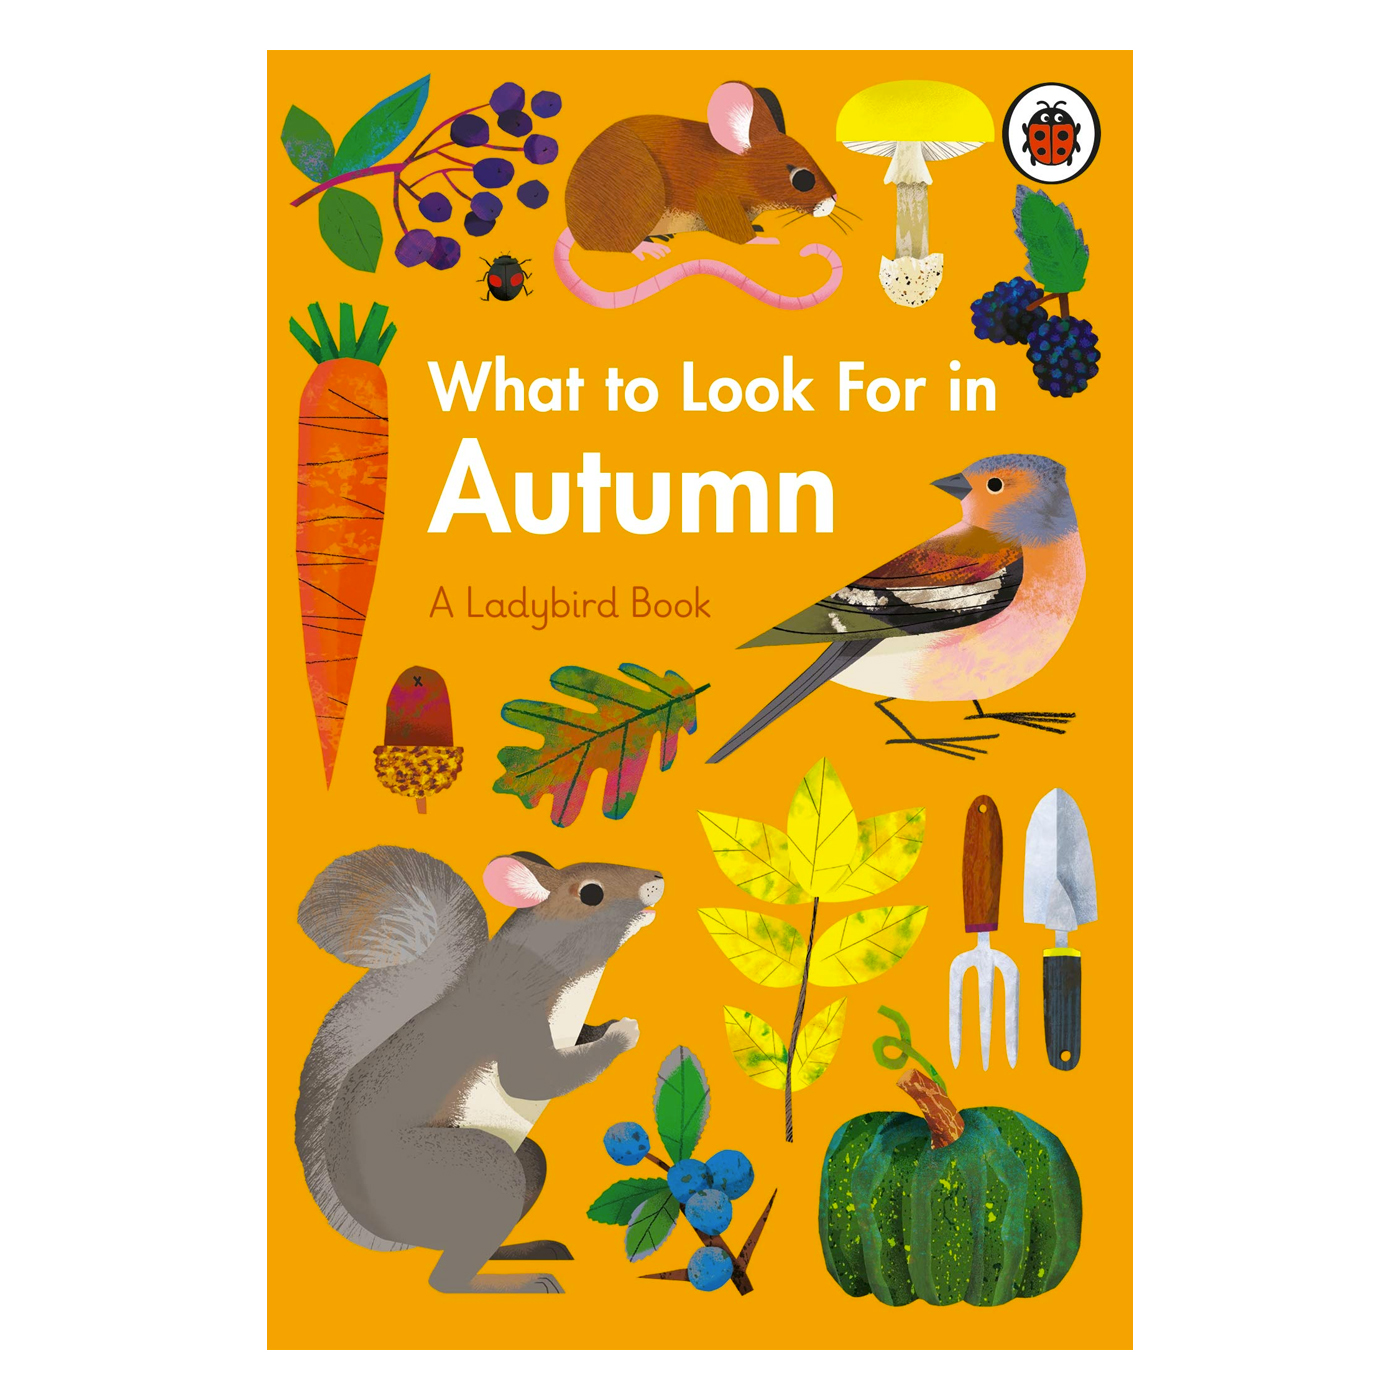  What to Look For in Autumn